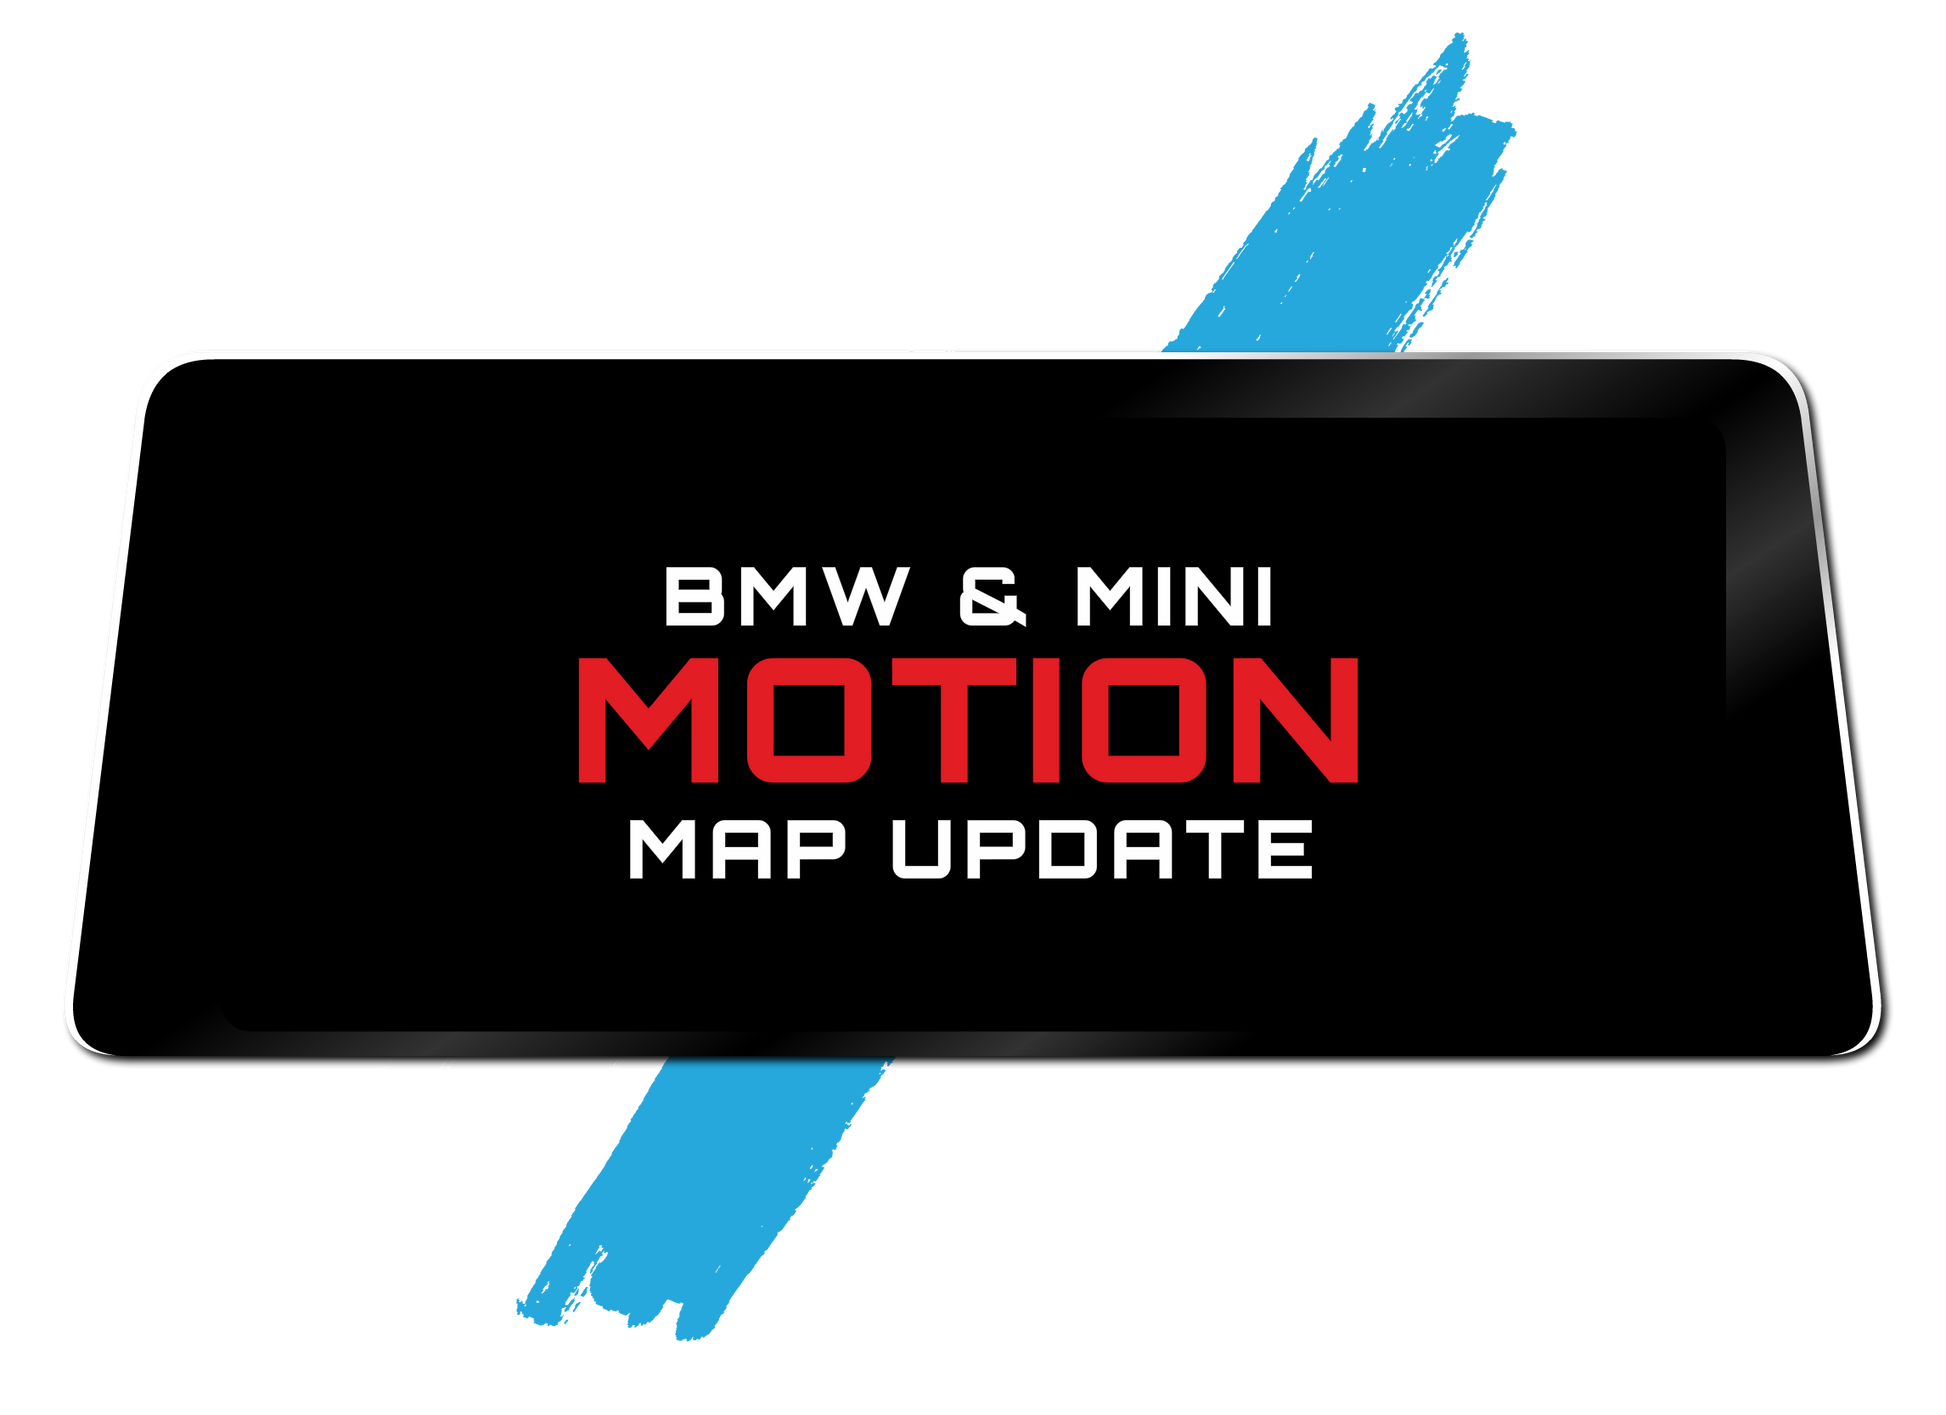 bmw and mini motion map update